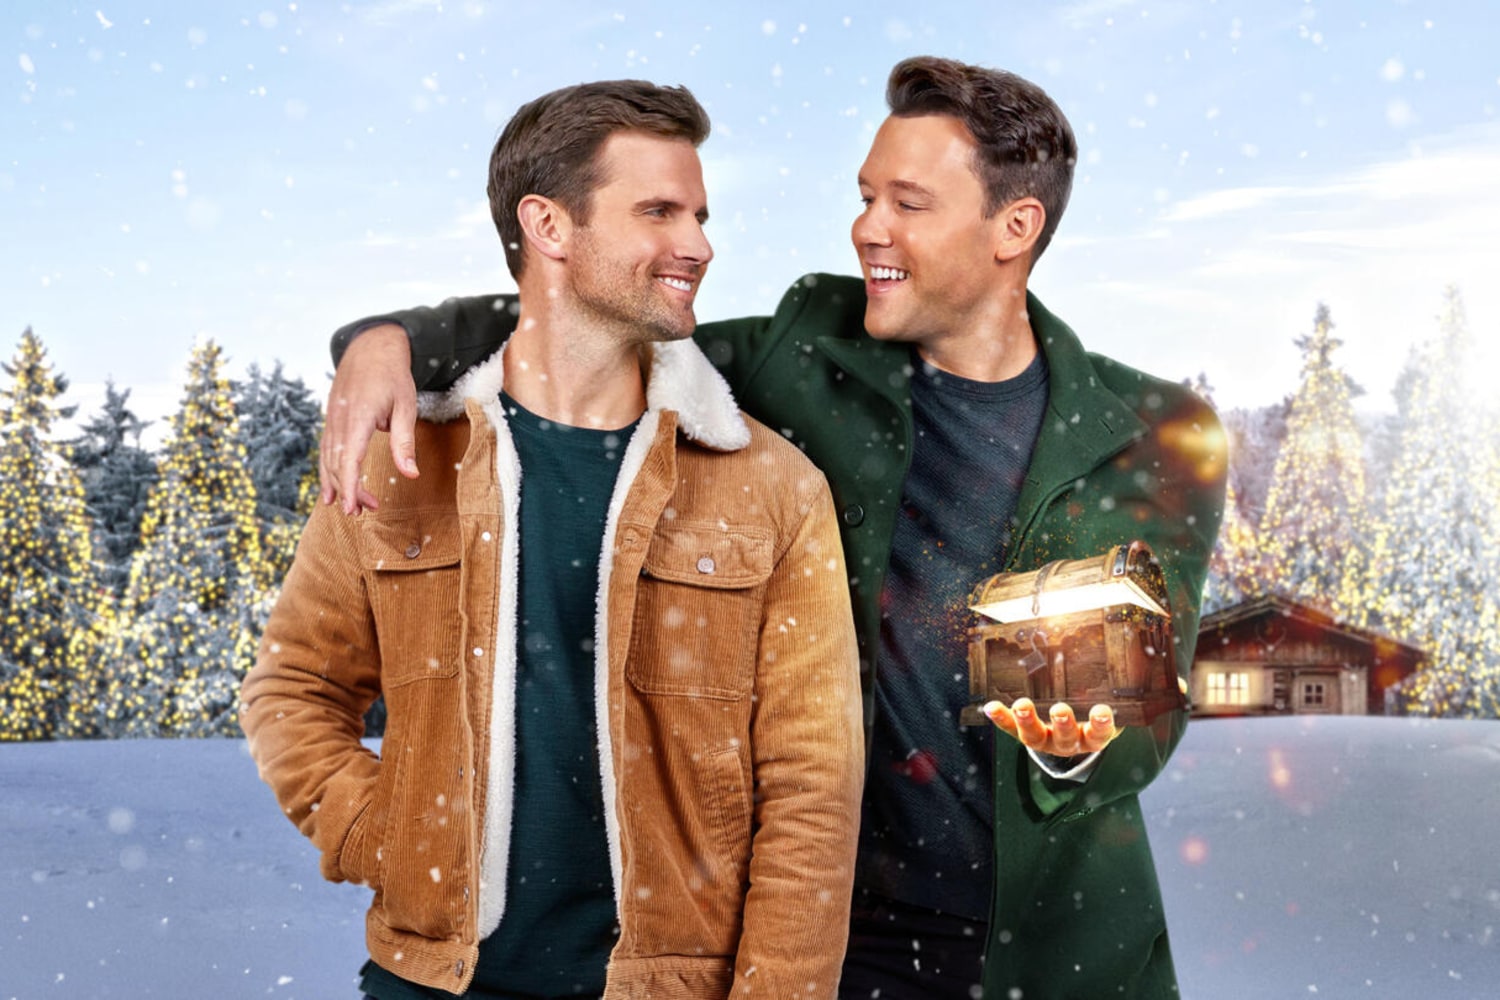 Make the yuletide gay Inside the making of this years LGBTQ holiday movies pic